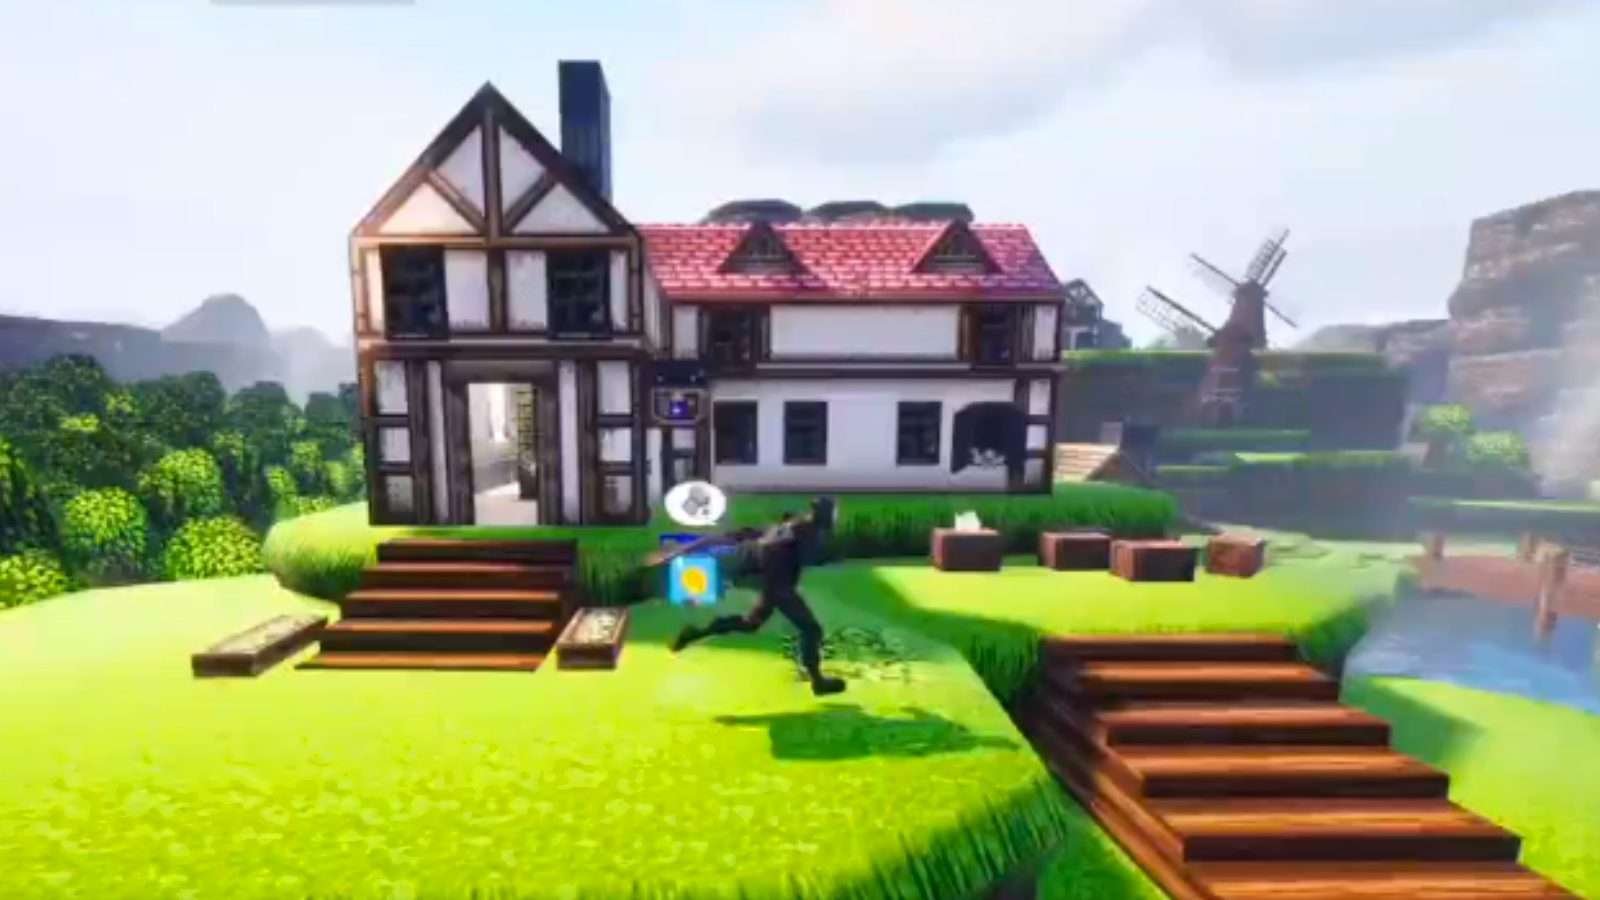 Fortnite creative map that lets players play in an RPG mode.